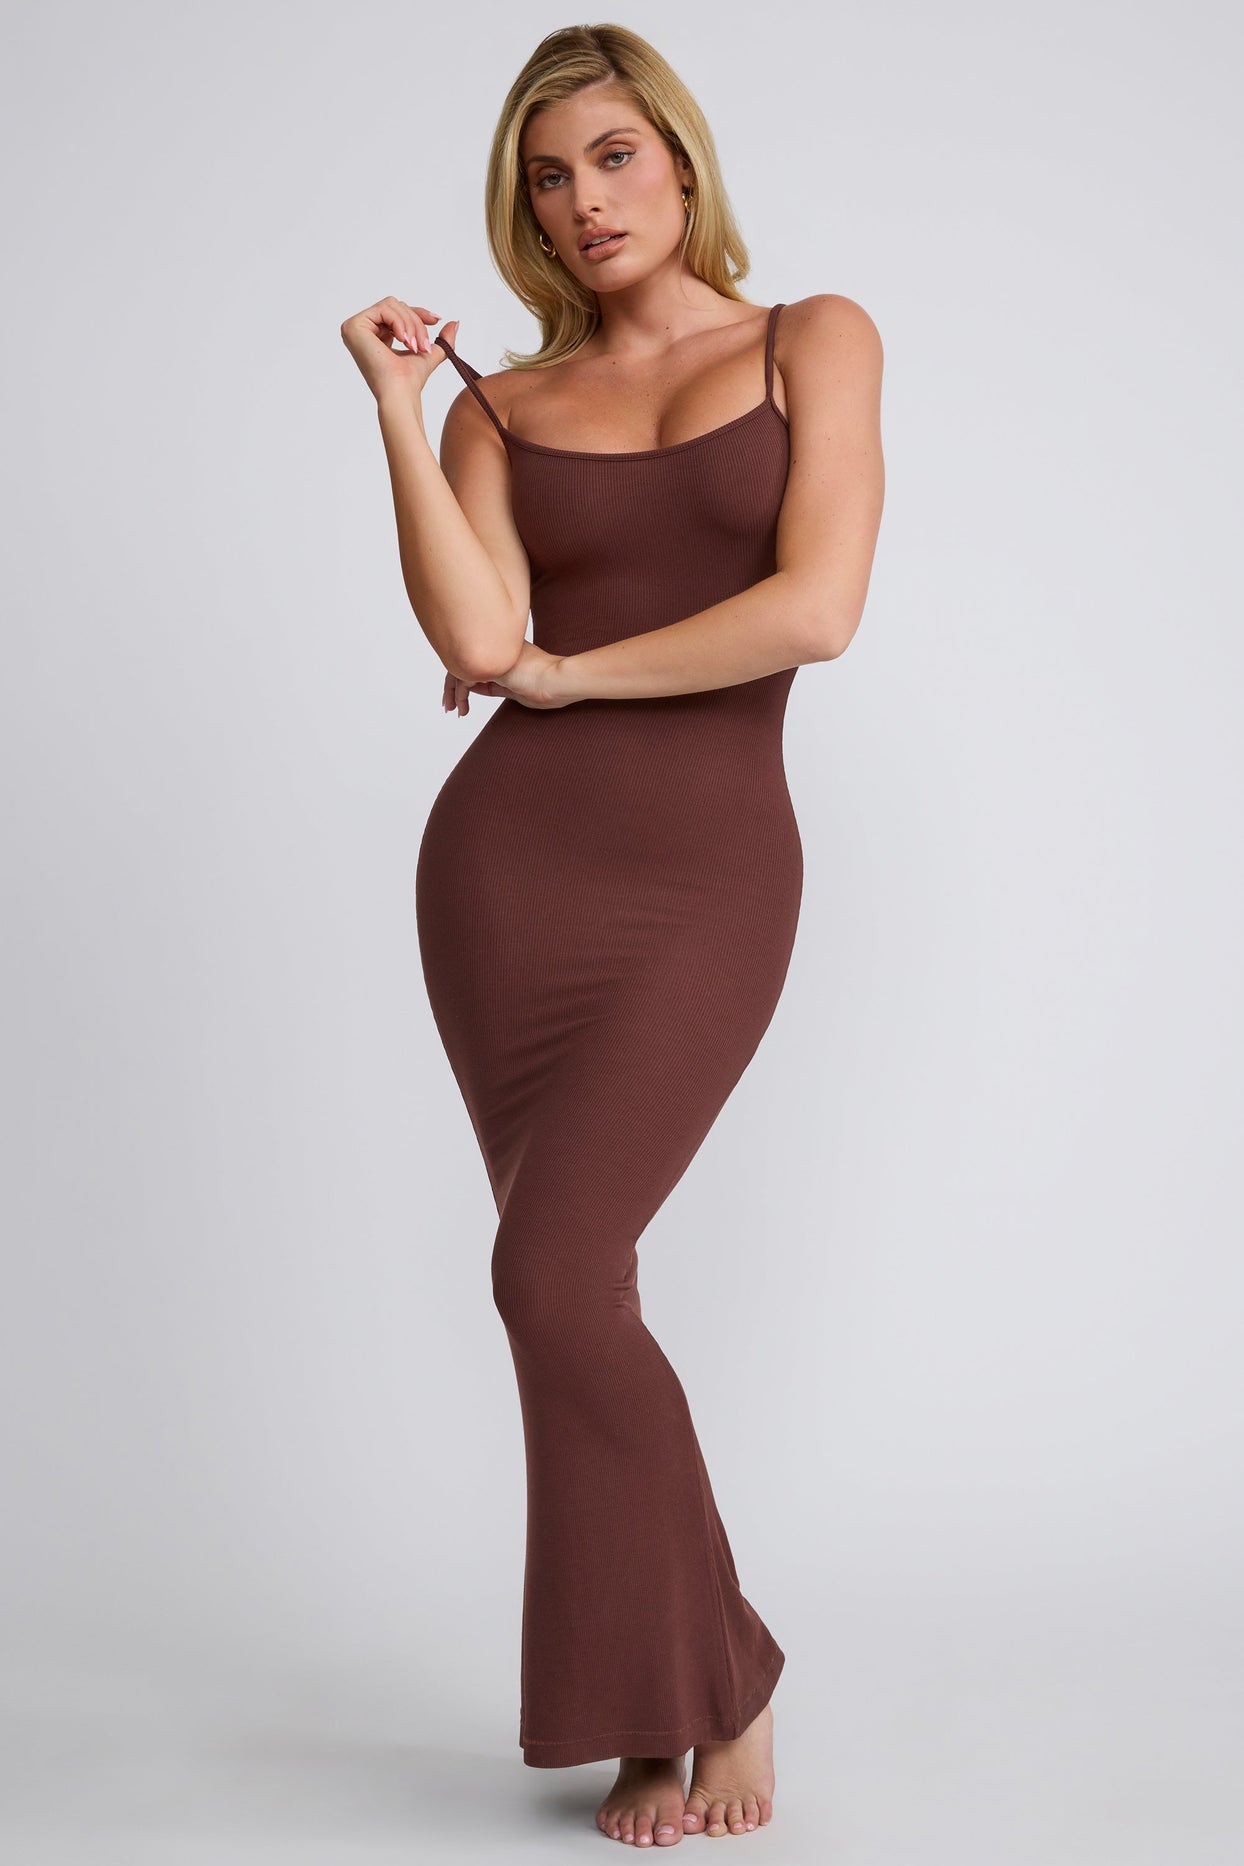 Ribbed Modal Square Neck Maxi Dress in Chocolate